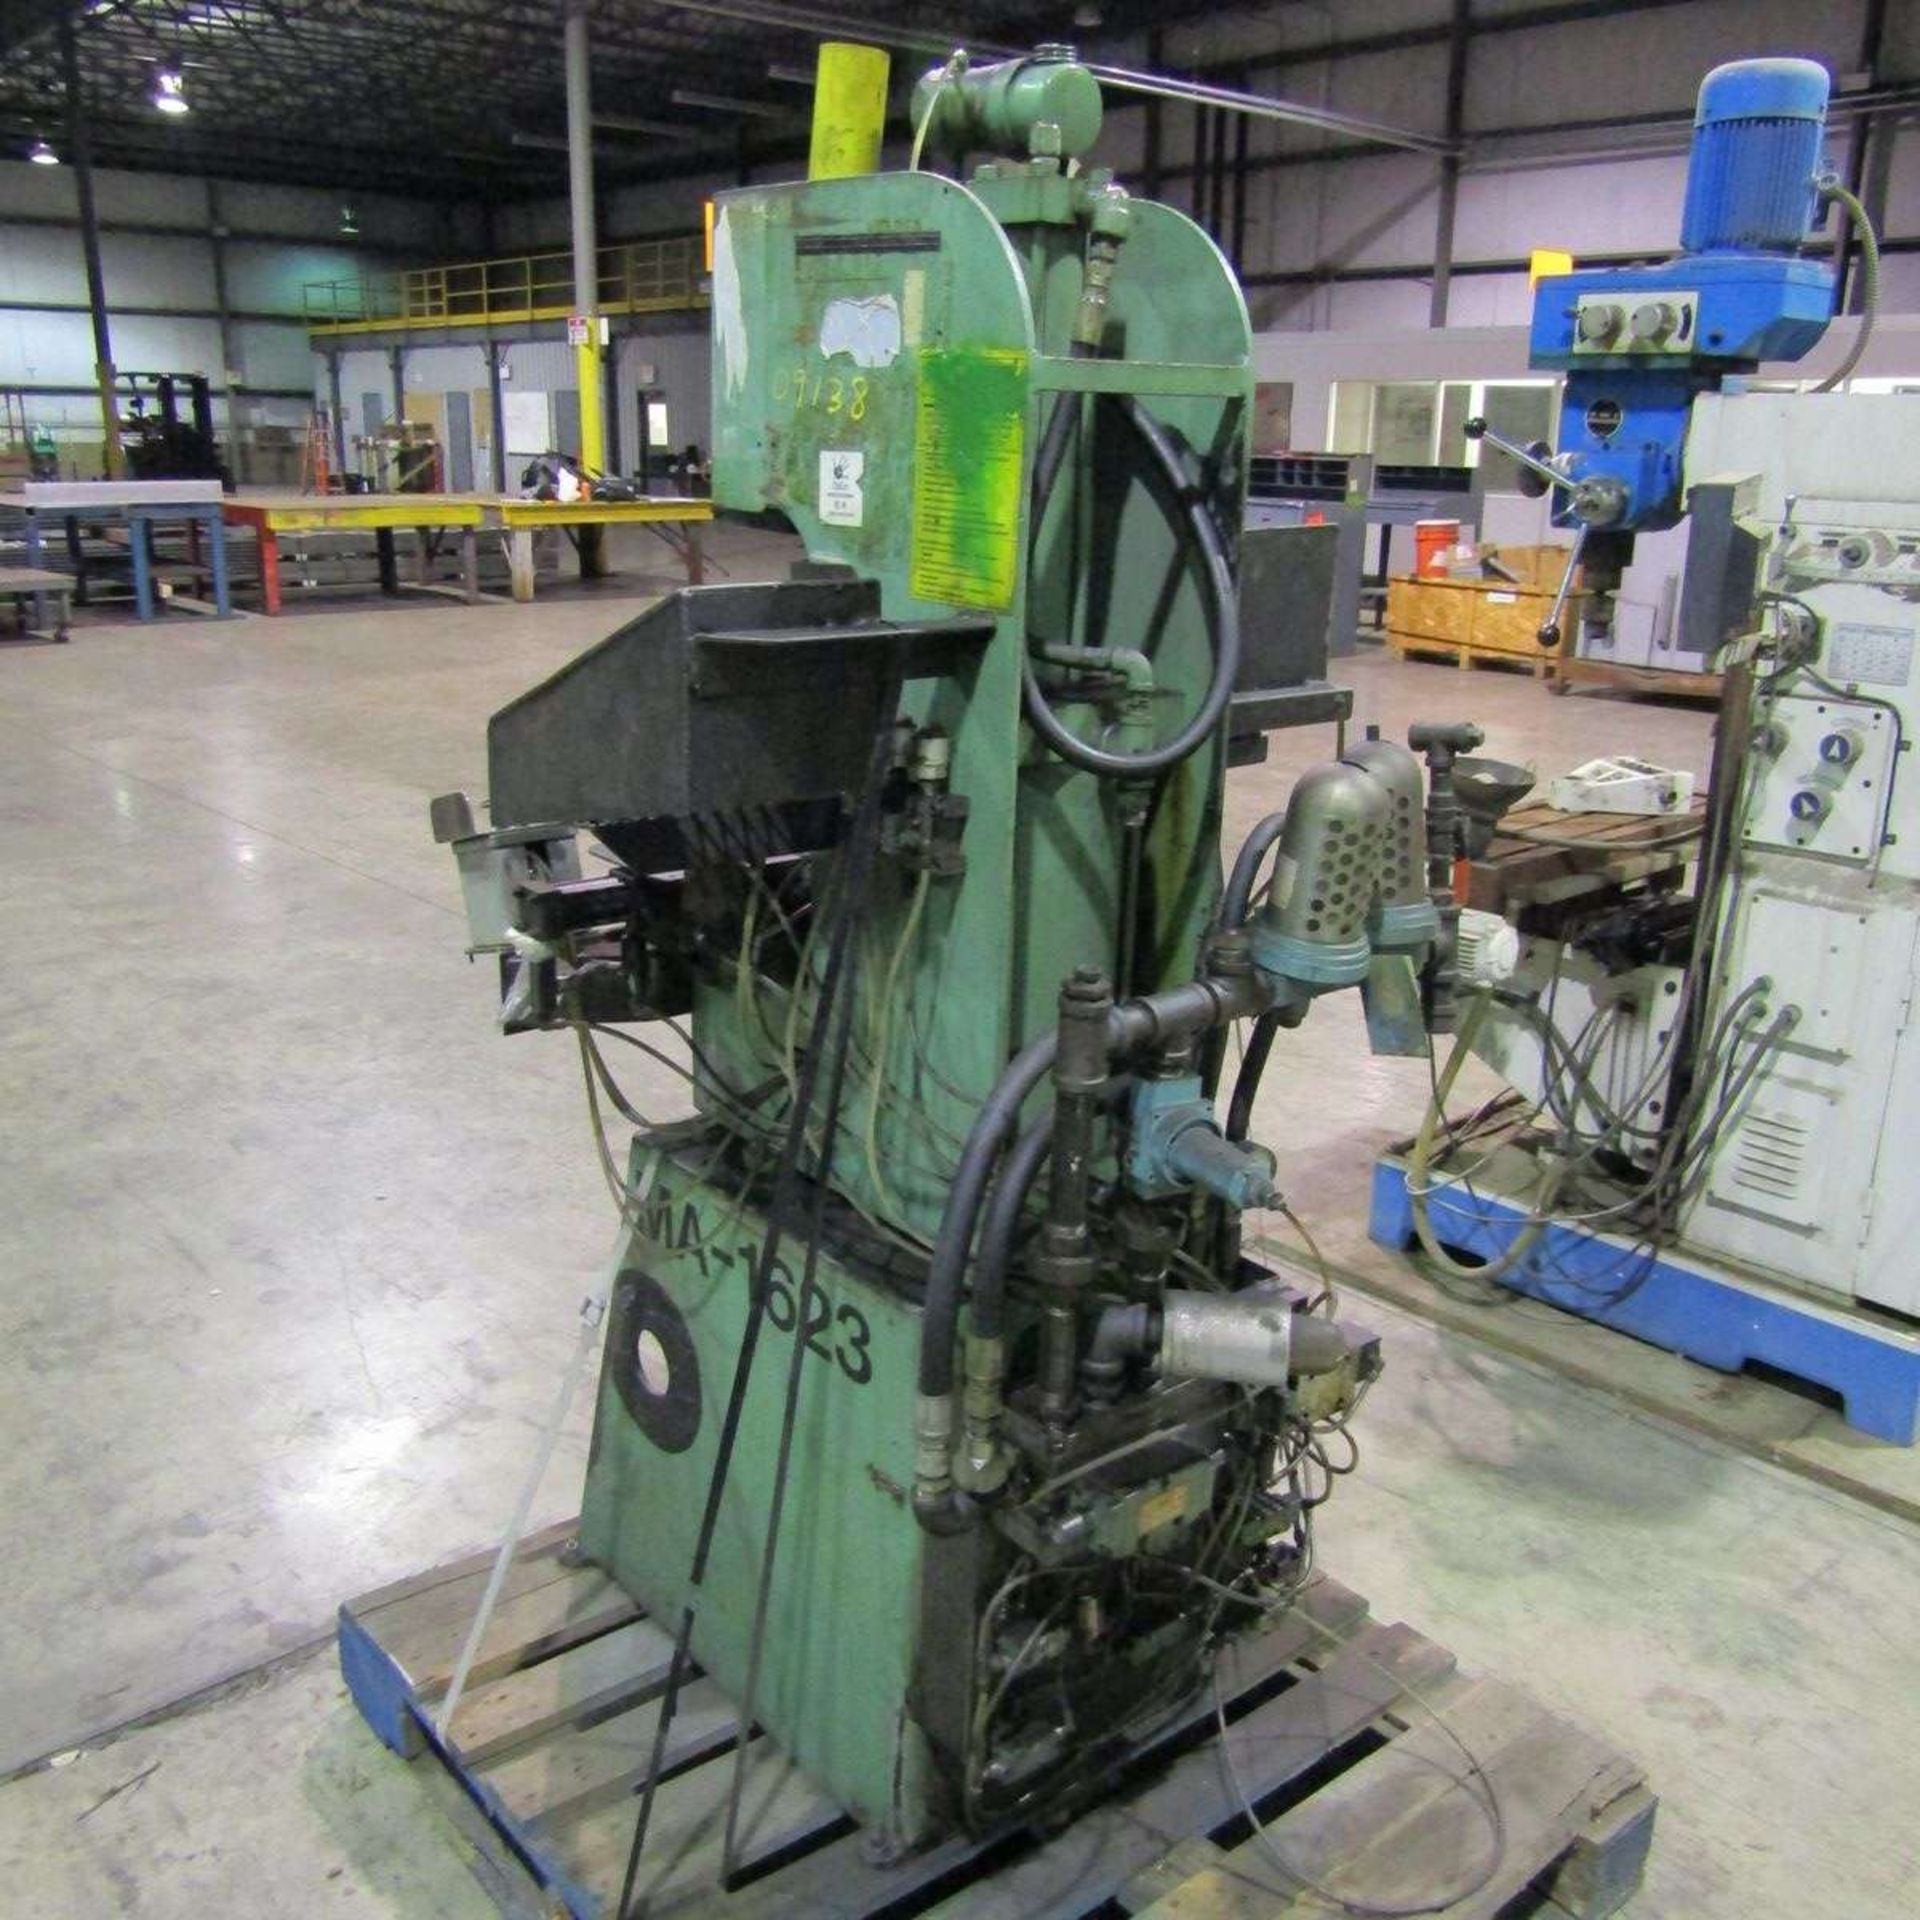 Air Hydraulics C-300 Punch Press - Image 5 of 7